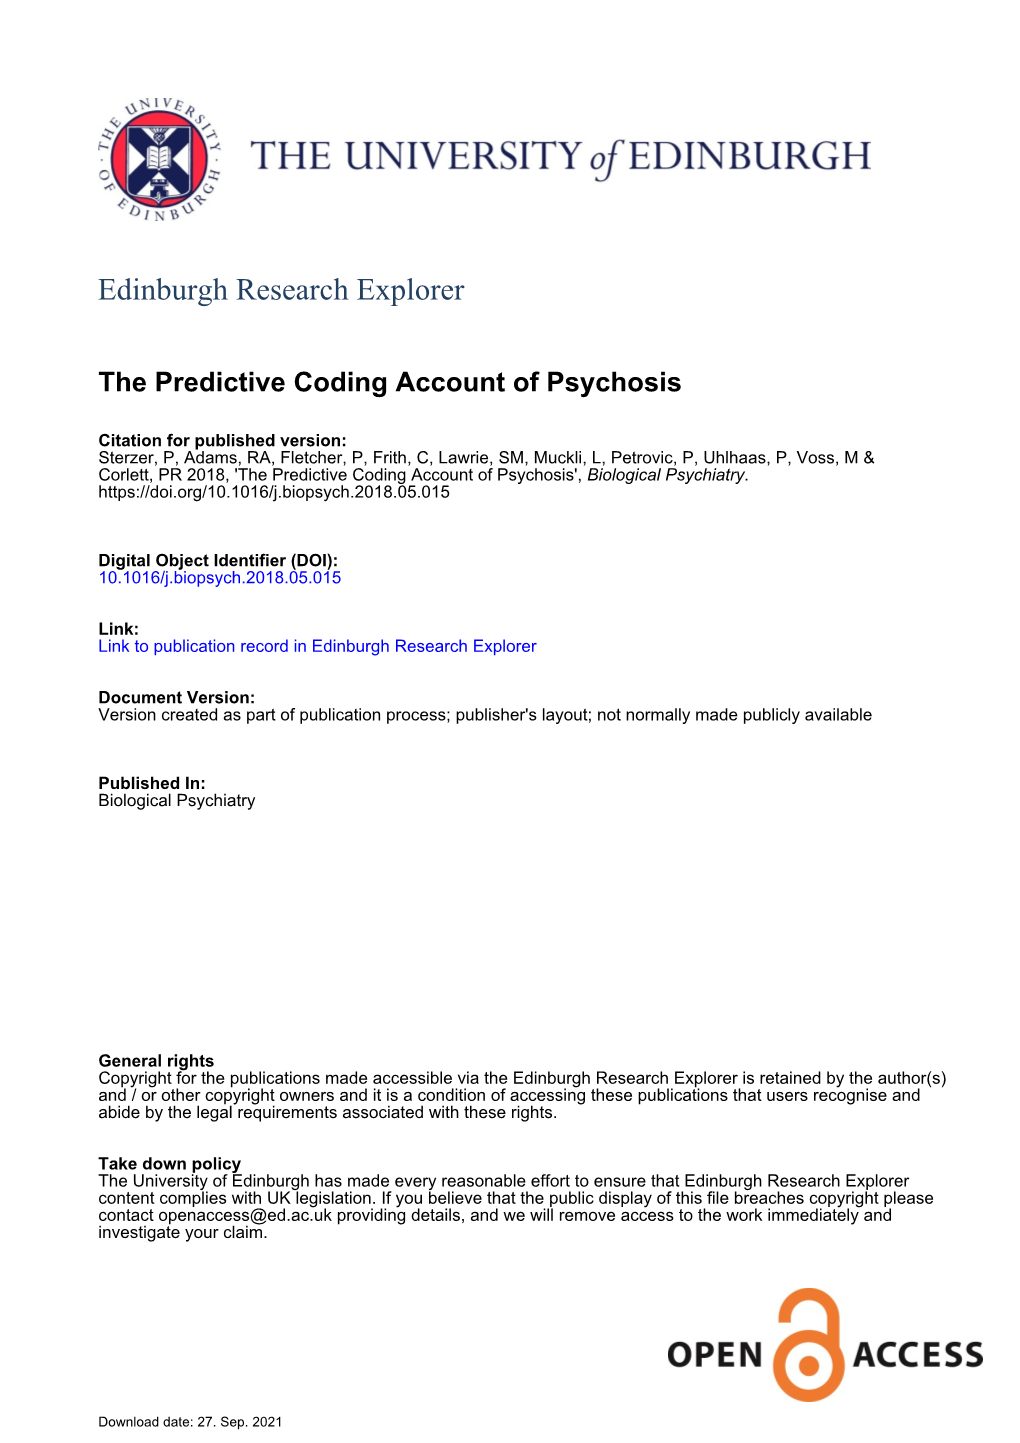 The Predictive Coding Account of Psychosis